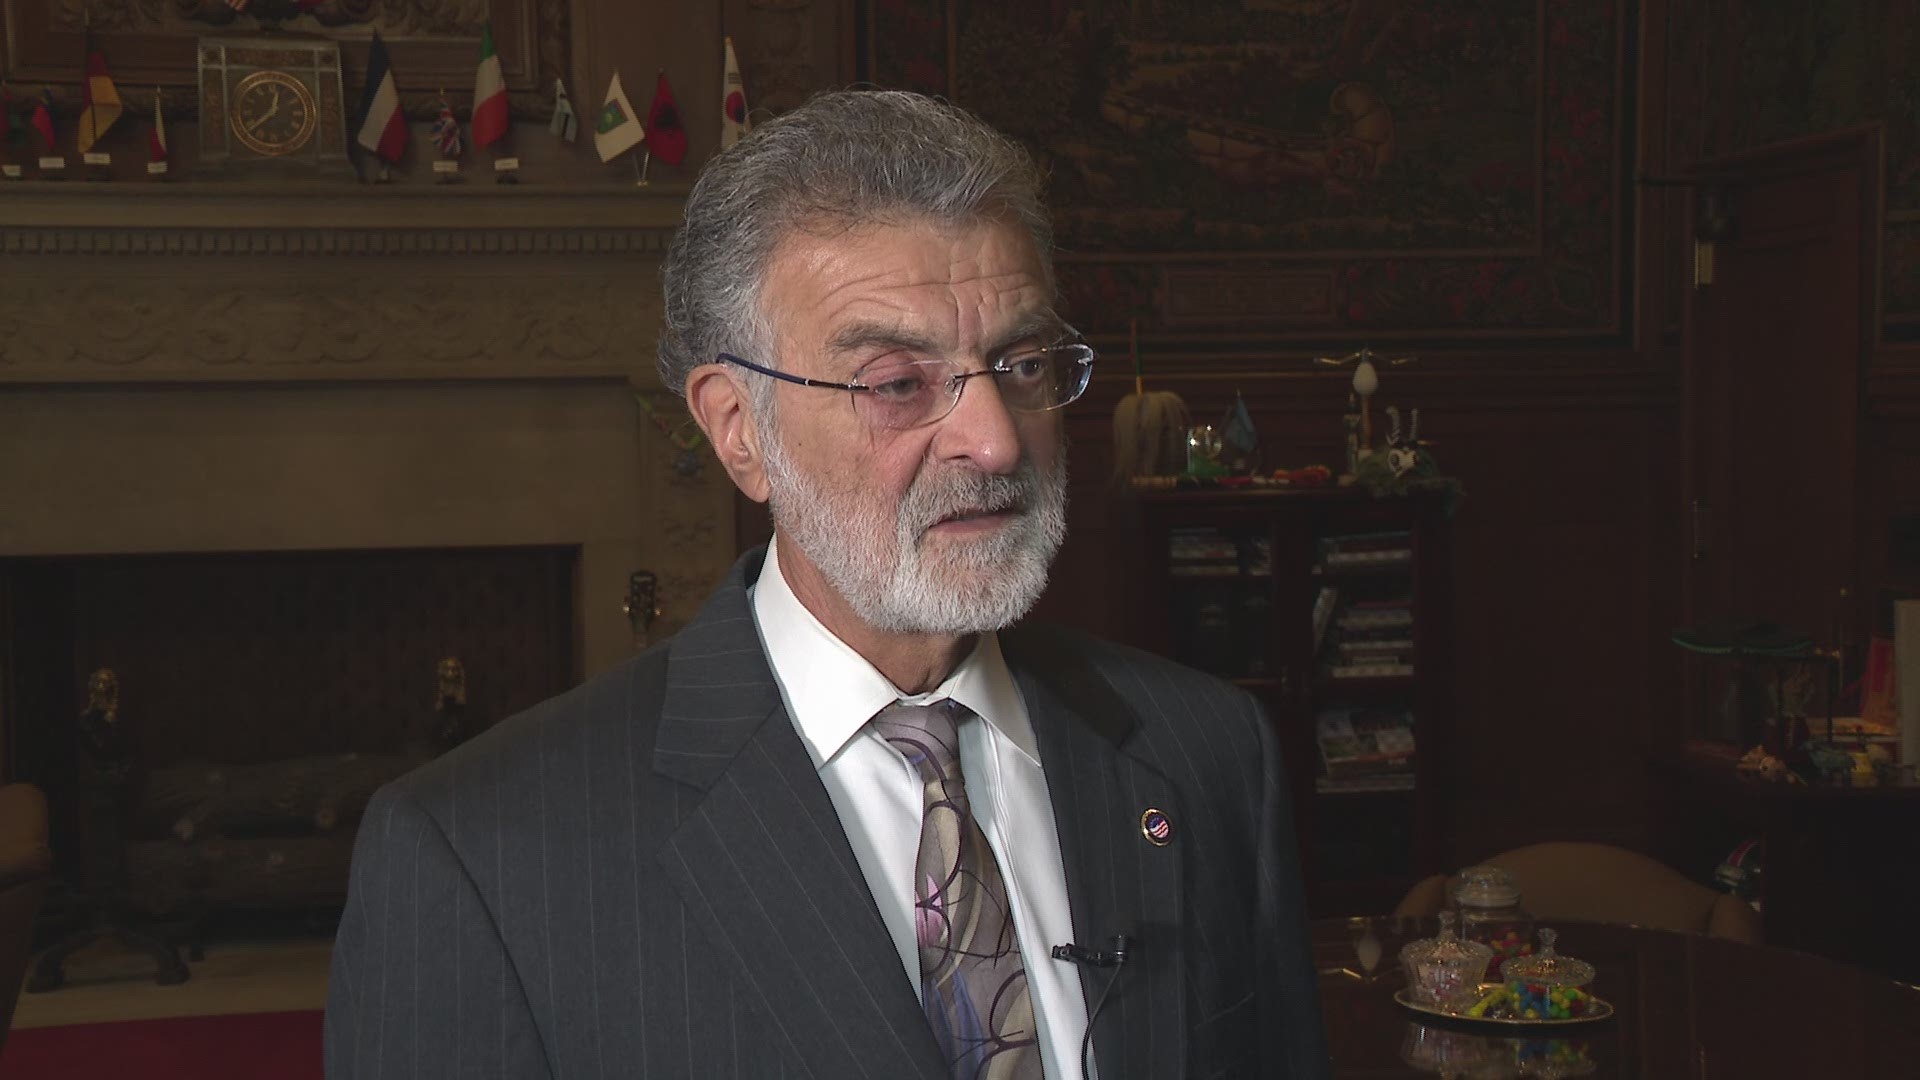 Mayor Frank Jackson full one-on-one interview with WKYC's Tom Meyer defending hiring of Lance Mason